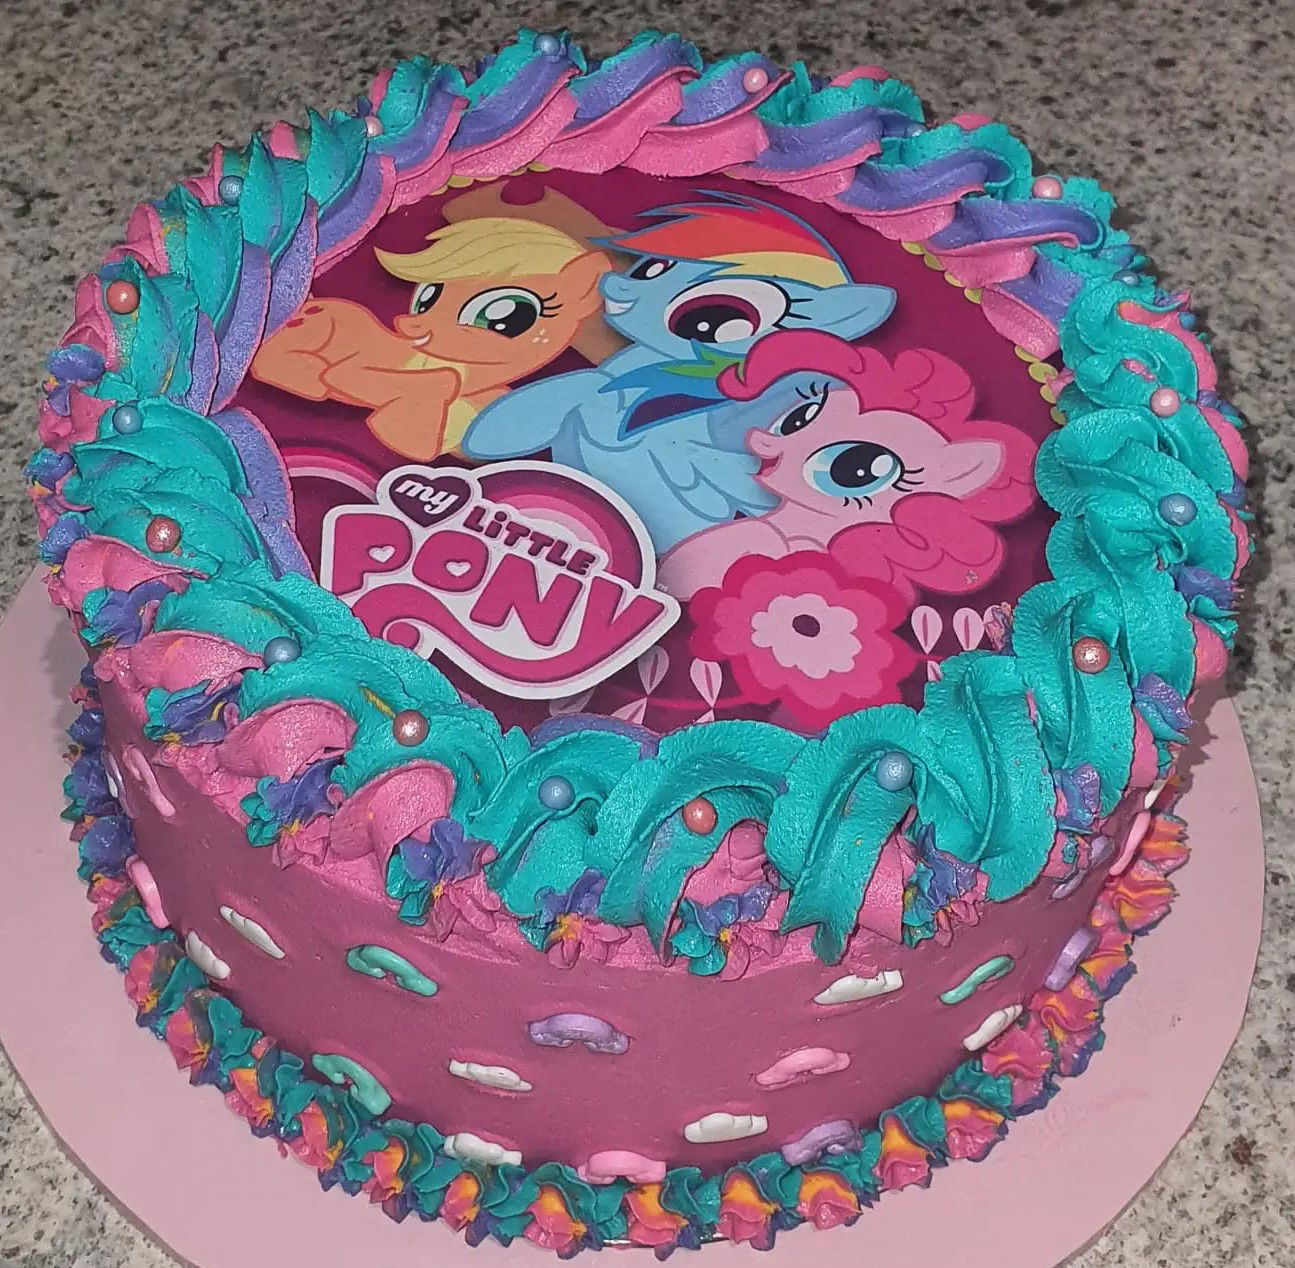 2 Layer Vanilla and Strawberry My Little Pony Birthday Cake With Buttercream Frosting